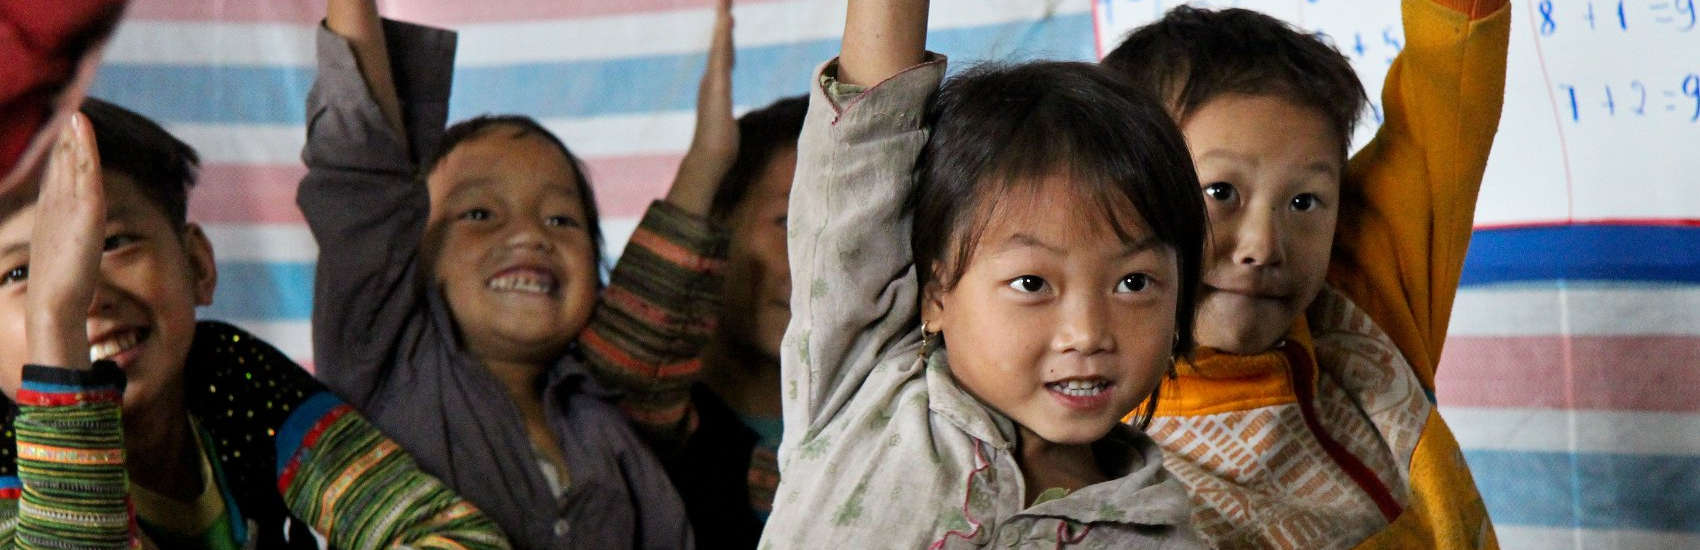 A first grader raises her hand in class, at a primary school in Van Chan, Vietnam. Save the Children supports this school (and others) with our Early Childhood Care and Development project, to address health and educational needs of children under six. Photo credit: Karin Kuhns/Save the Children, February 2013.